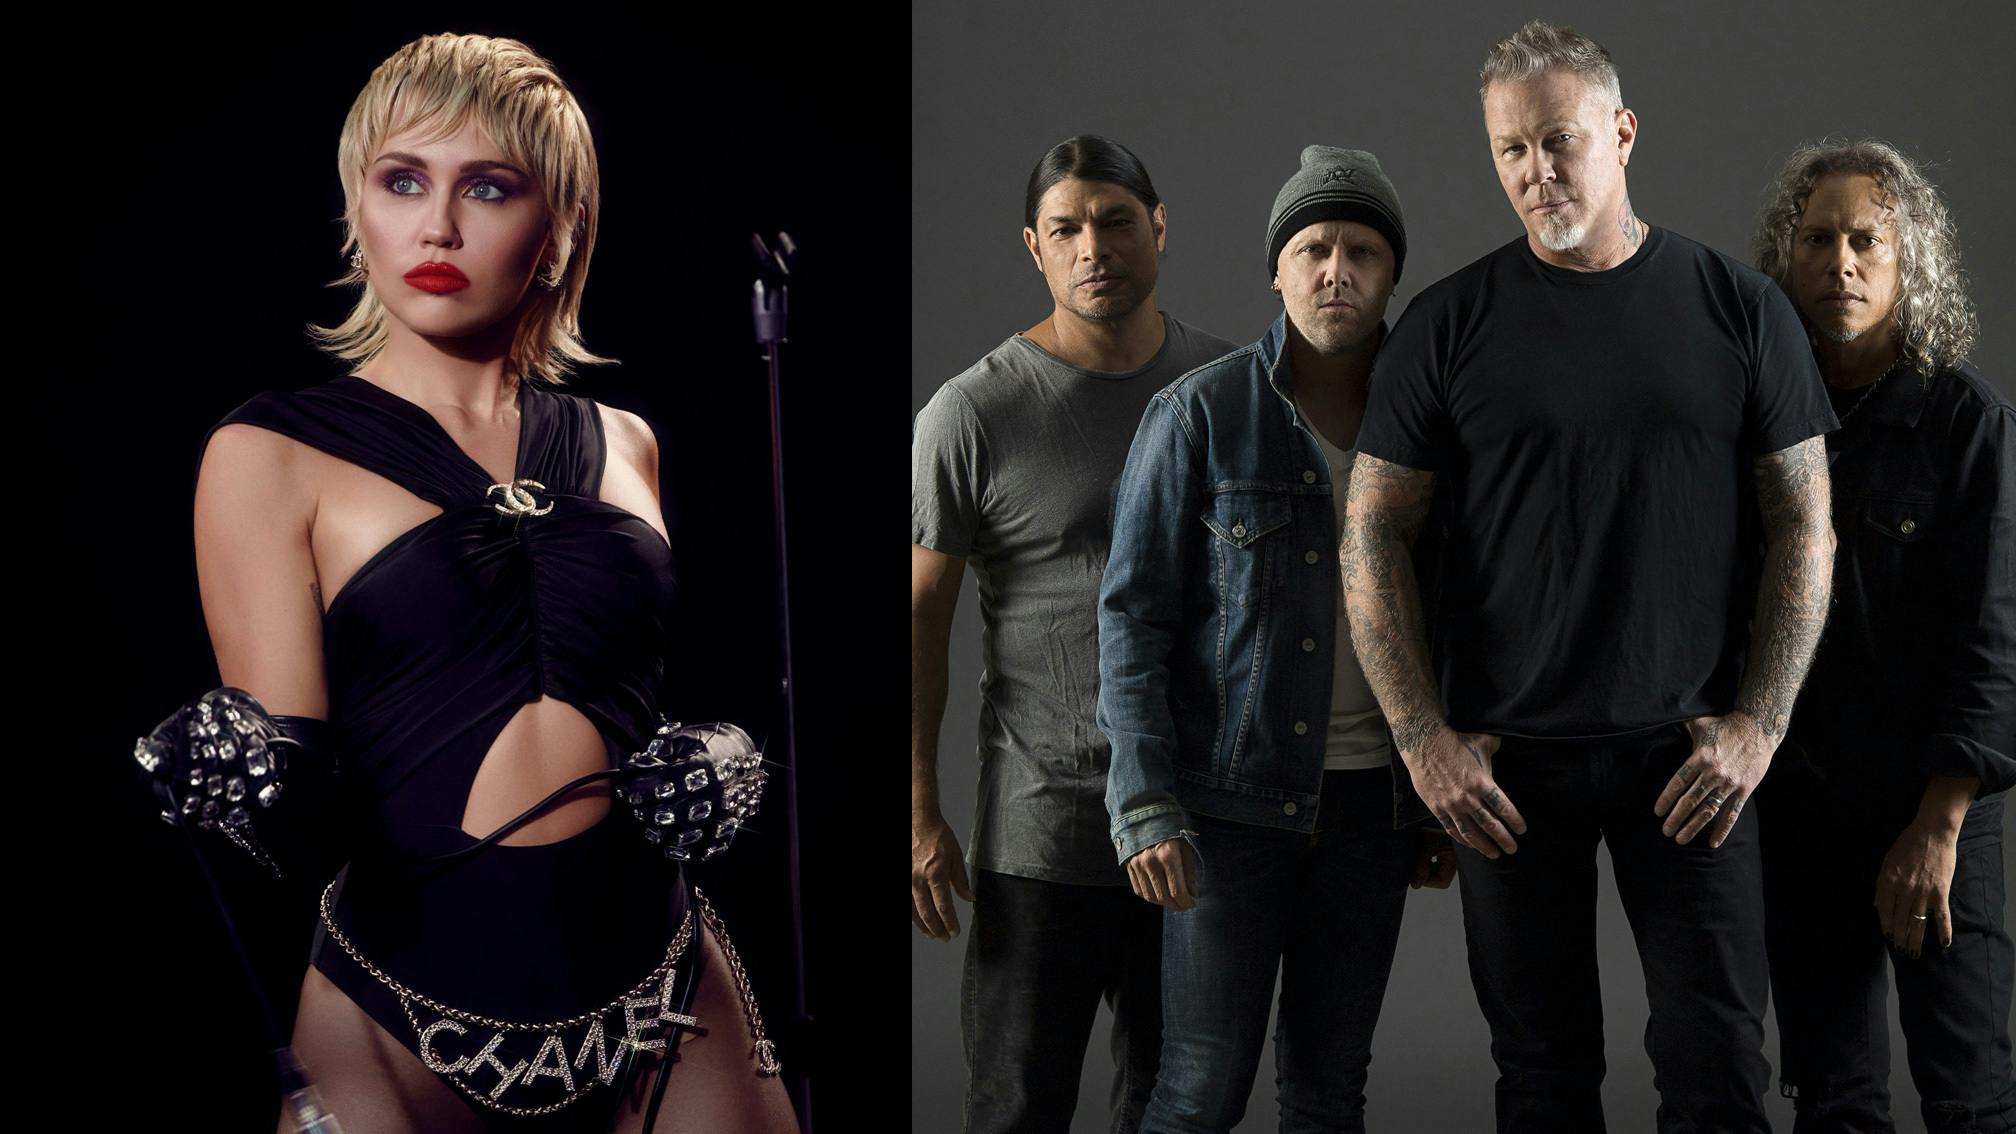 Is Miley Cyrus' New Album Partly Inspired By Metallica?